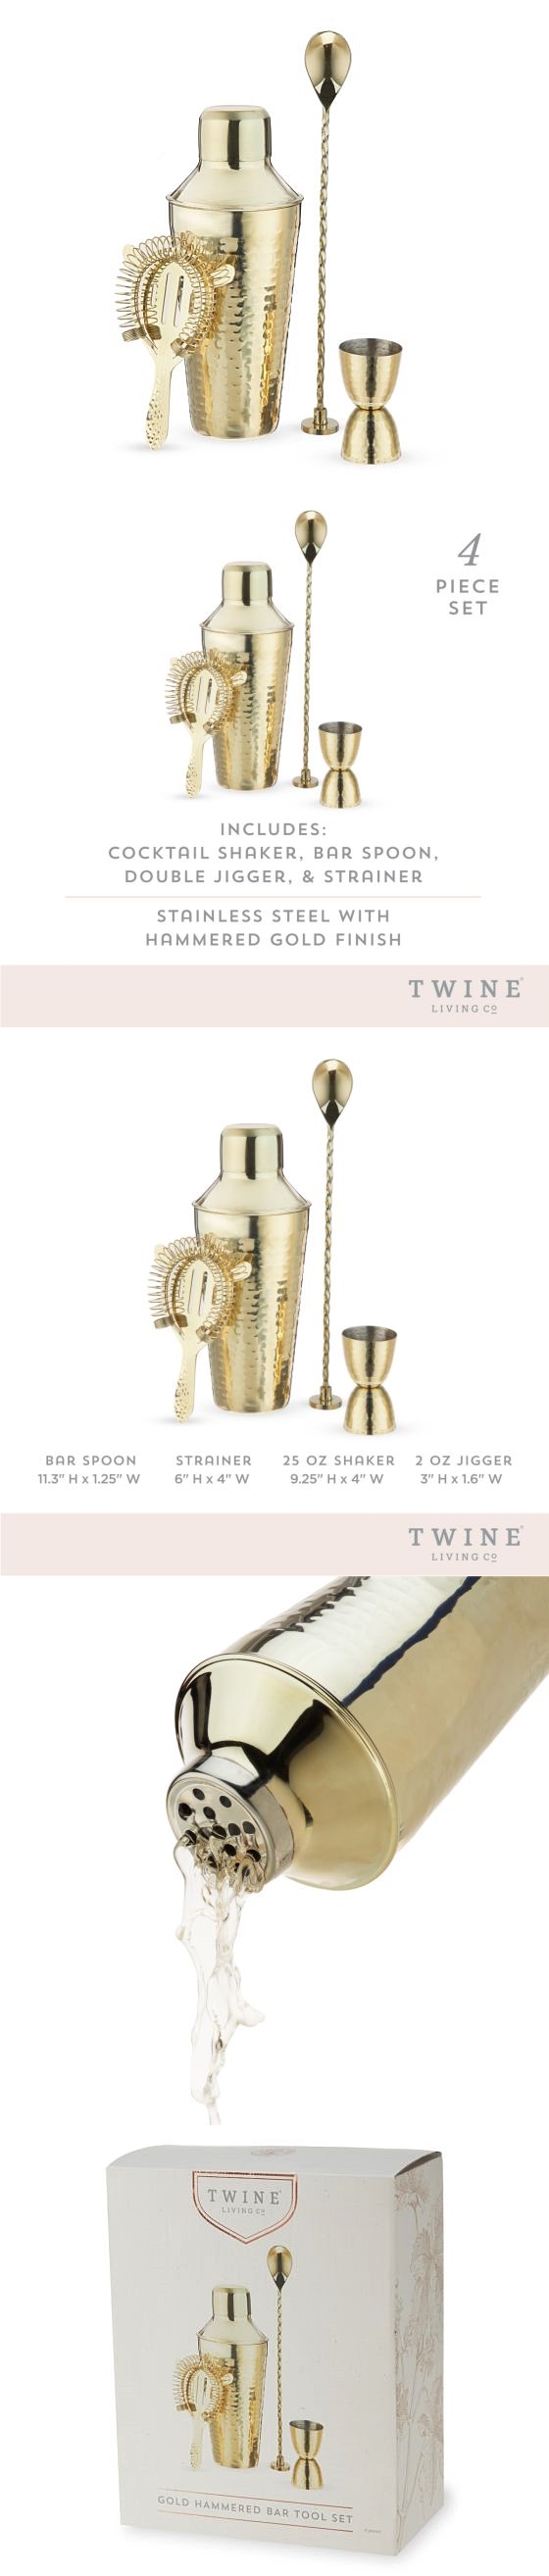 Hammered Gold Finish Stainless-Steel 4-Piece Barware Set by Twine